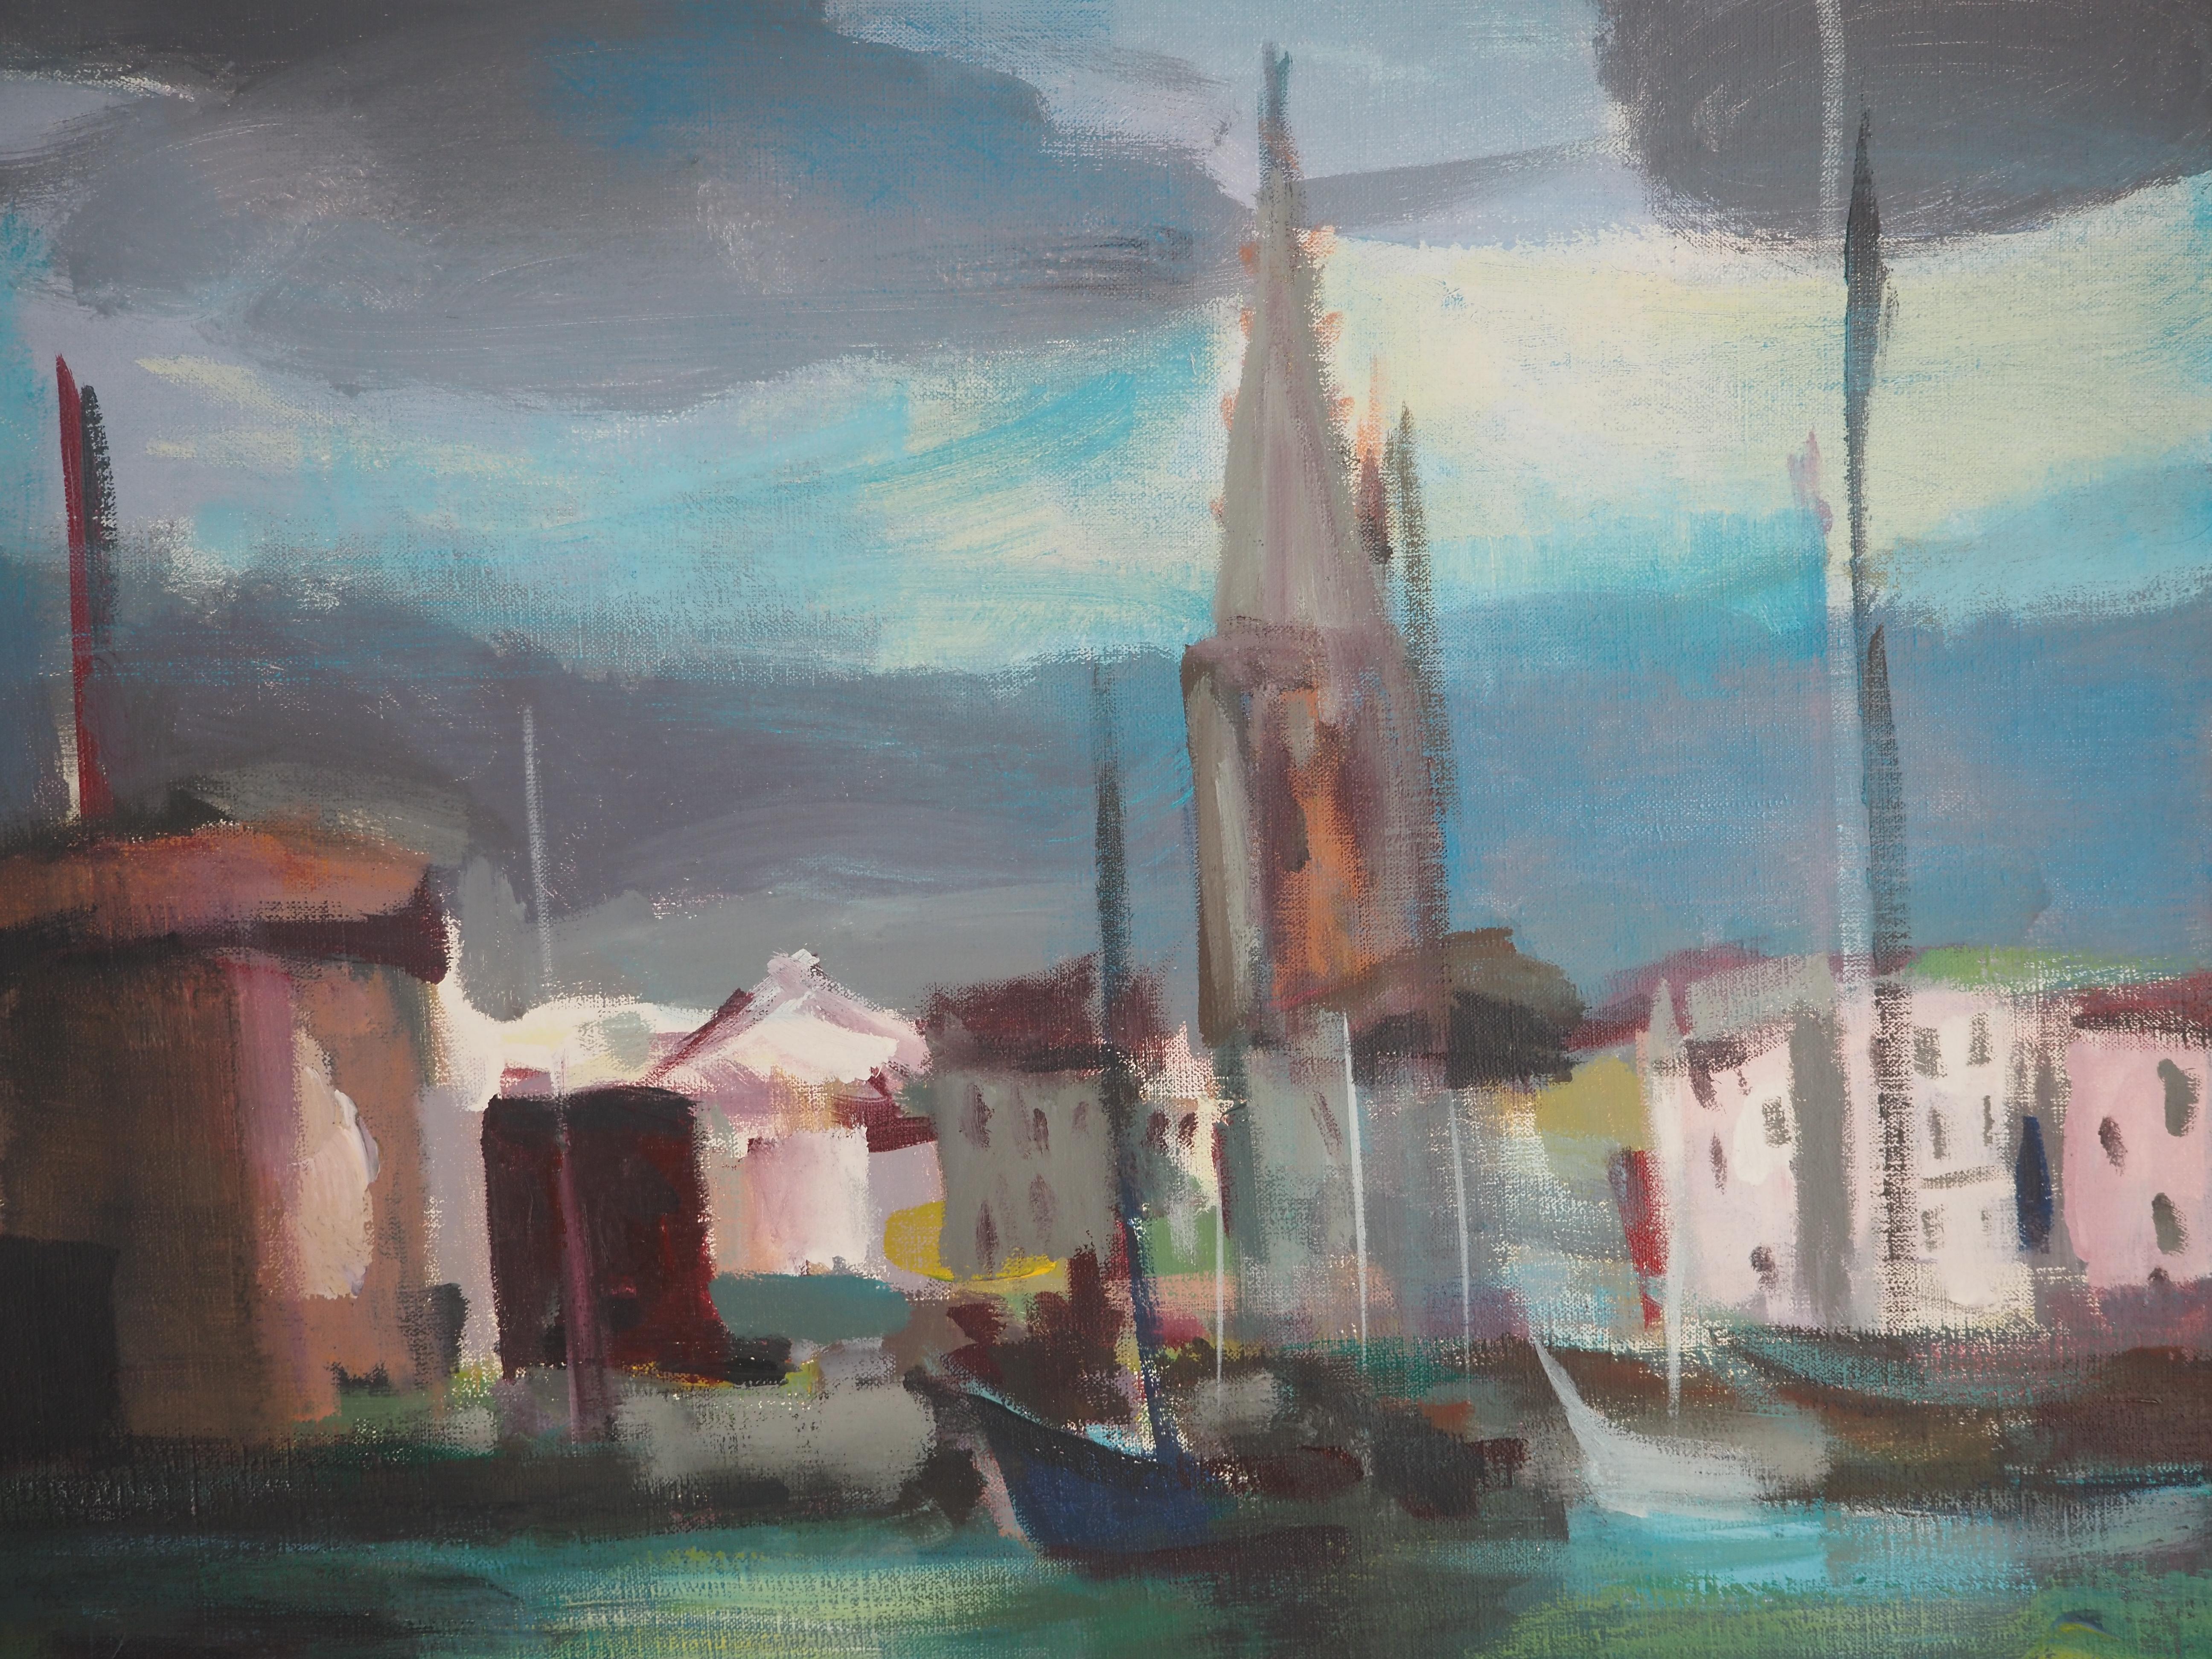 The Old Harbour on the Atlantic - Original oil painting on canvas, Handsigned 2